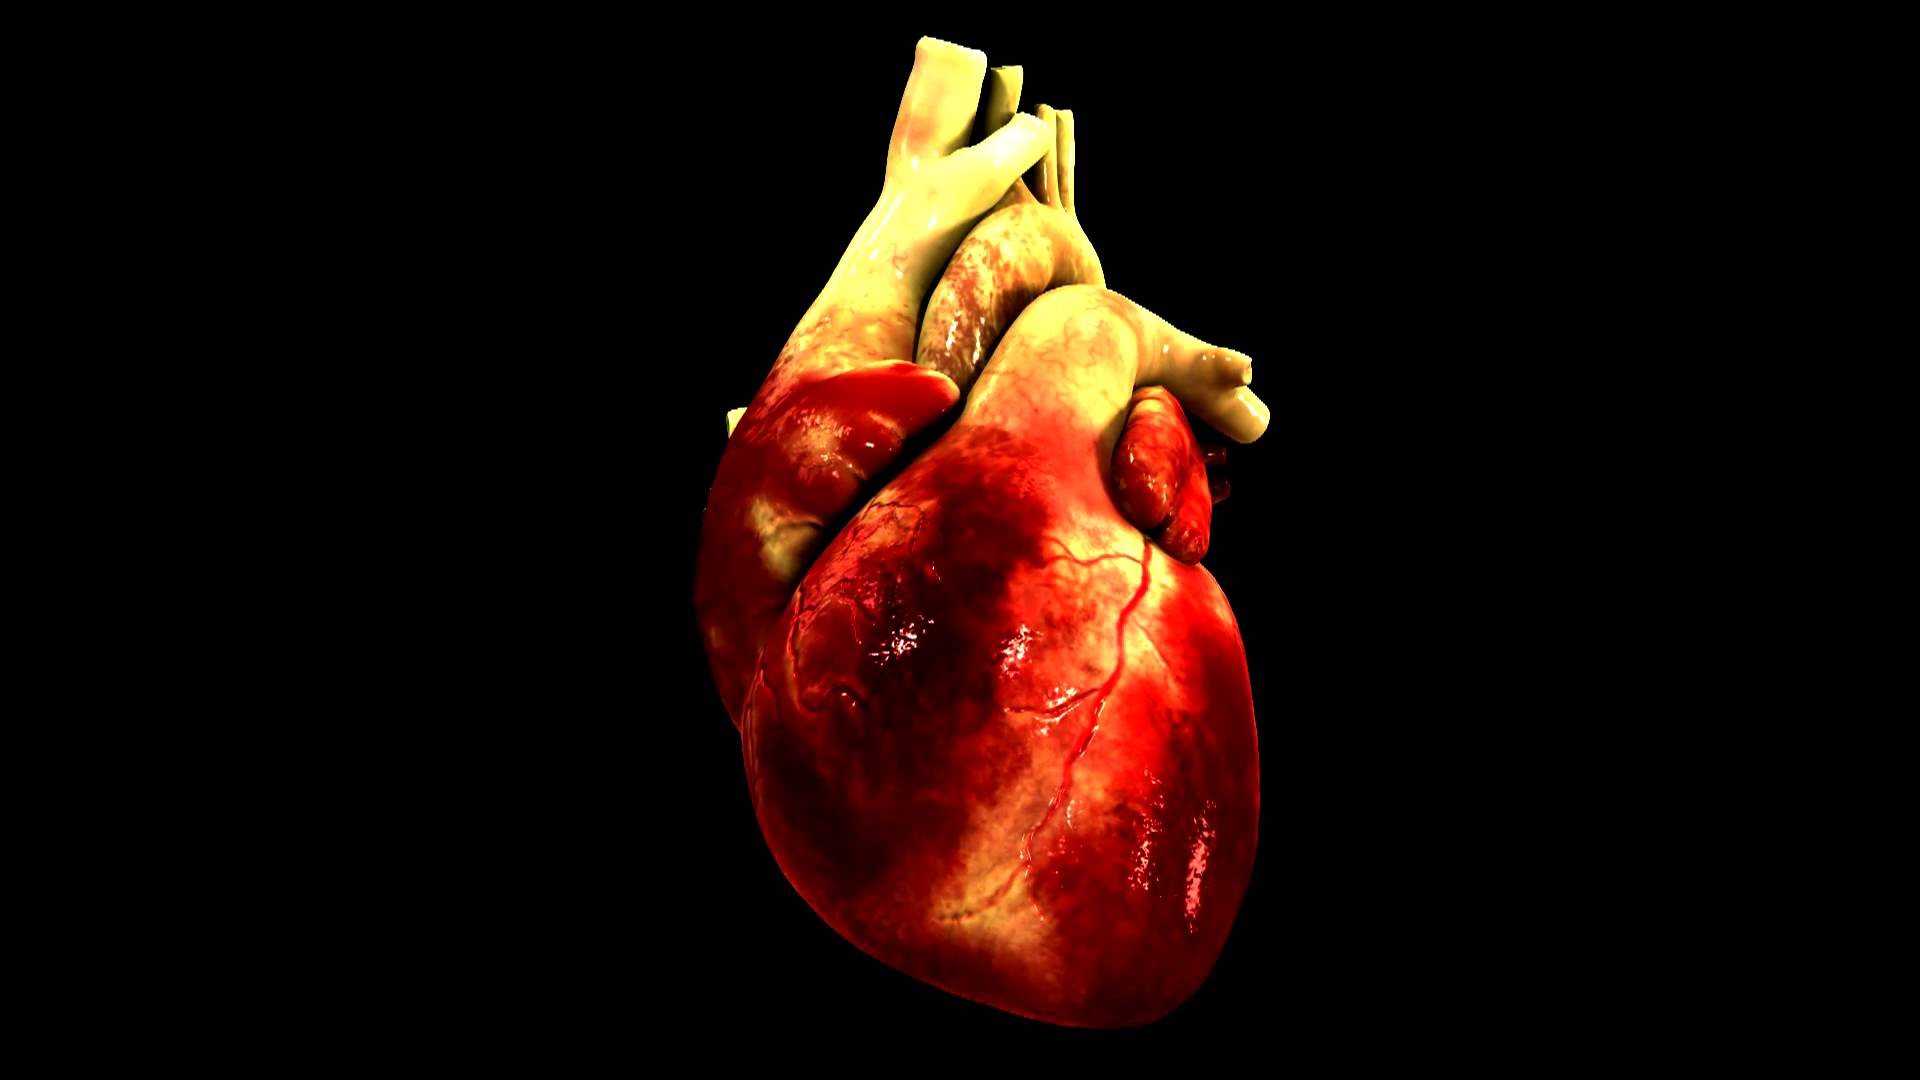 3D models of heart, arteries created